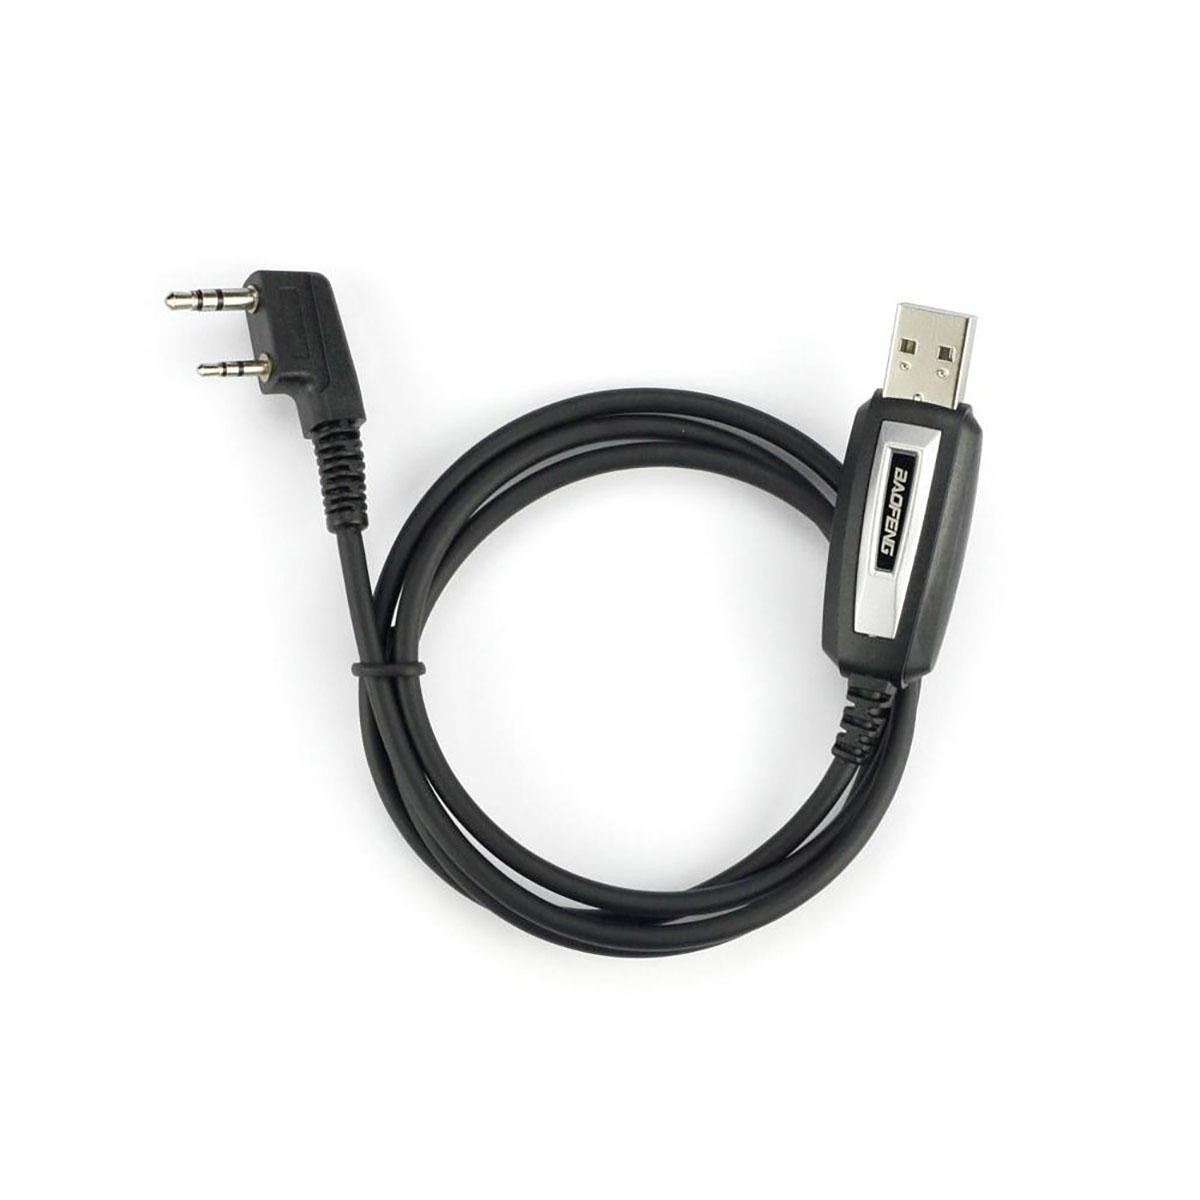 Programming Cable for Two Way Talkie Walkie Baofeng UV-5R,BF-888S,U...